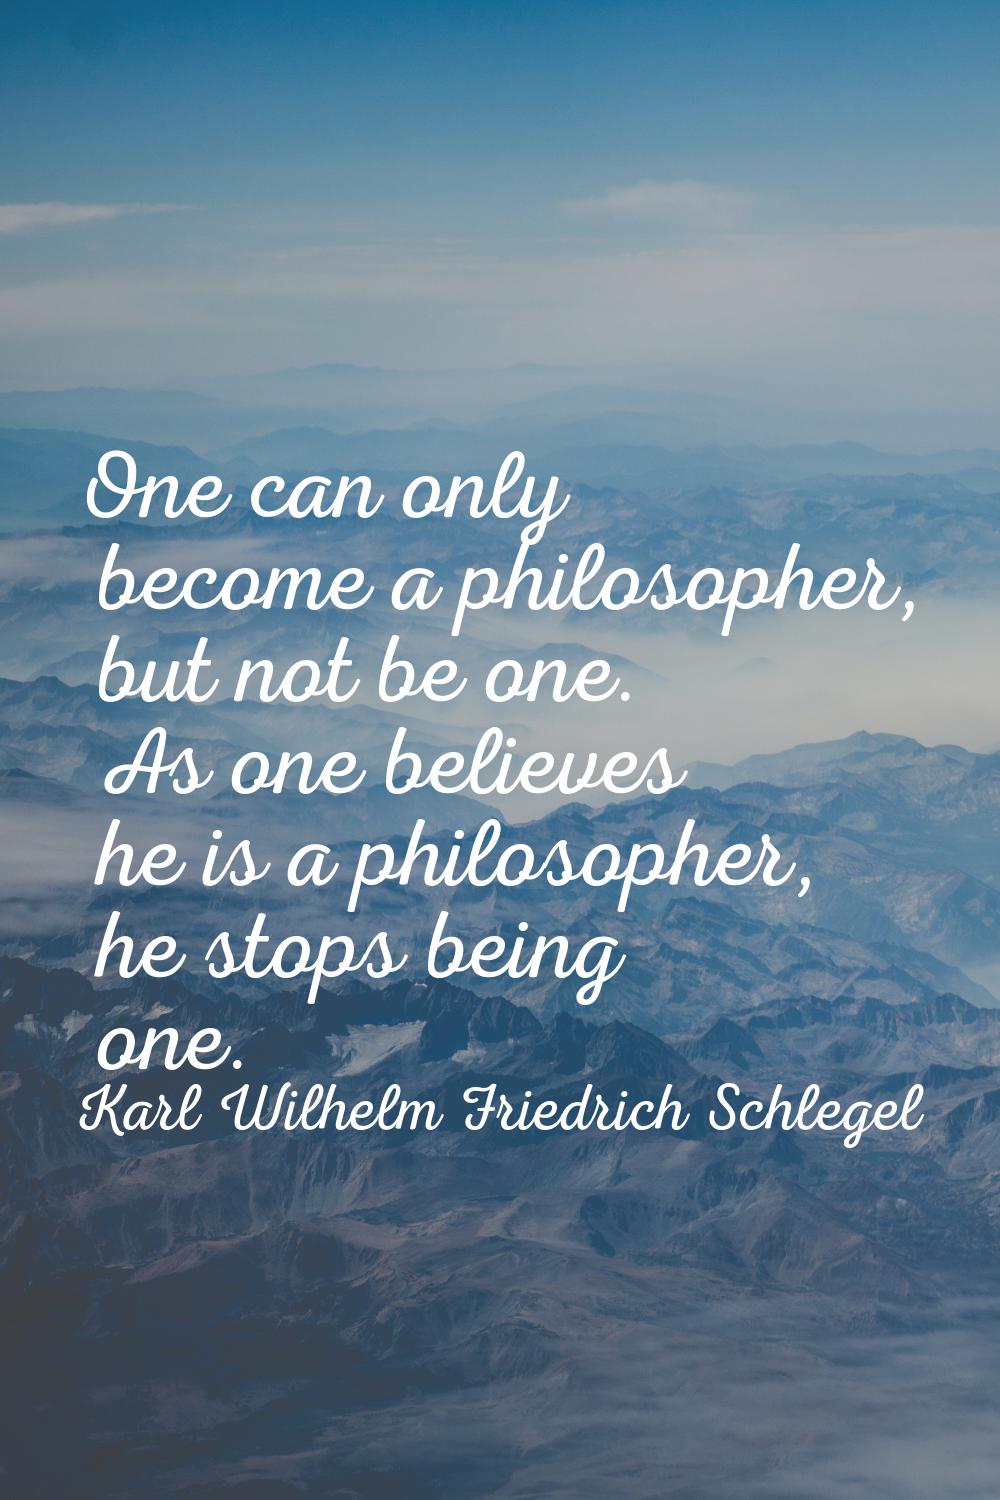 One can only become a philosopher, but not be one. As one believes he is a philosopher, he stops be